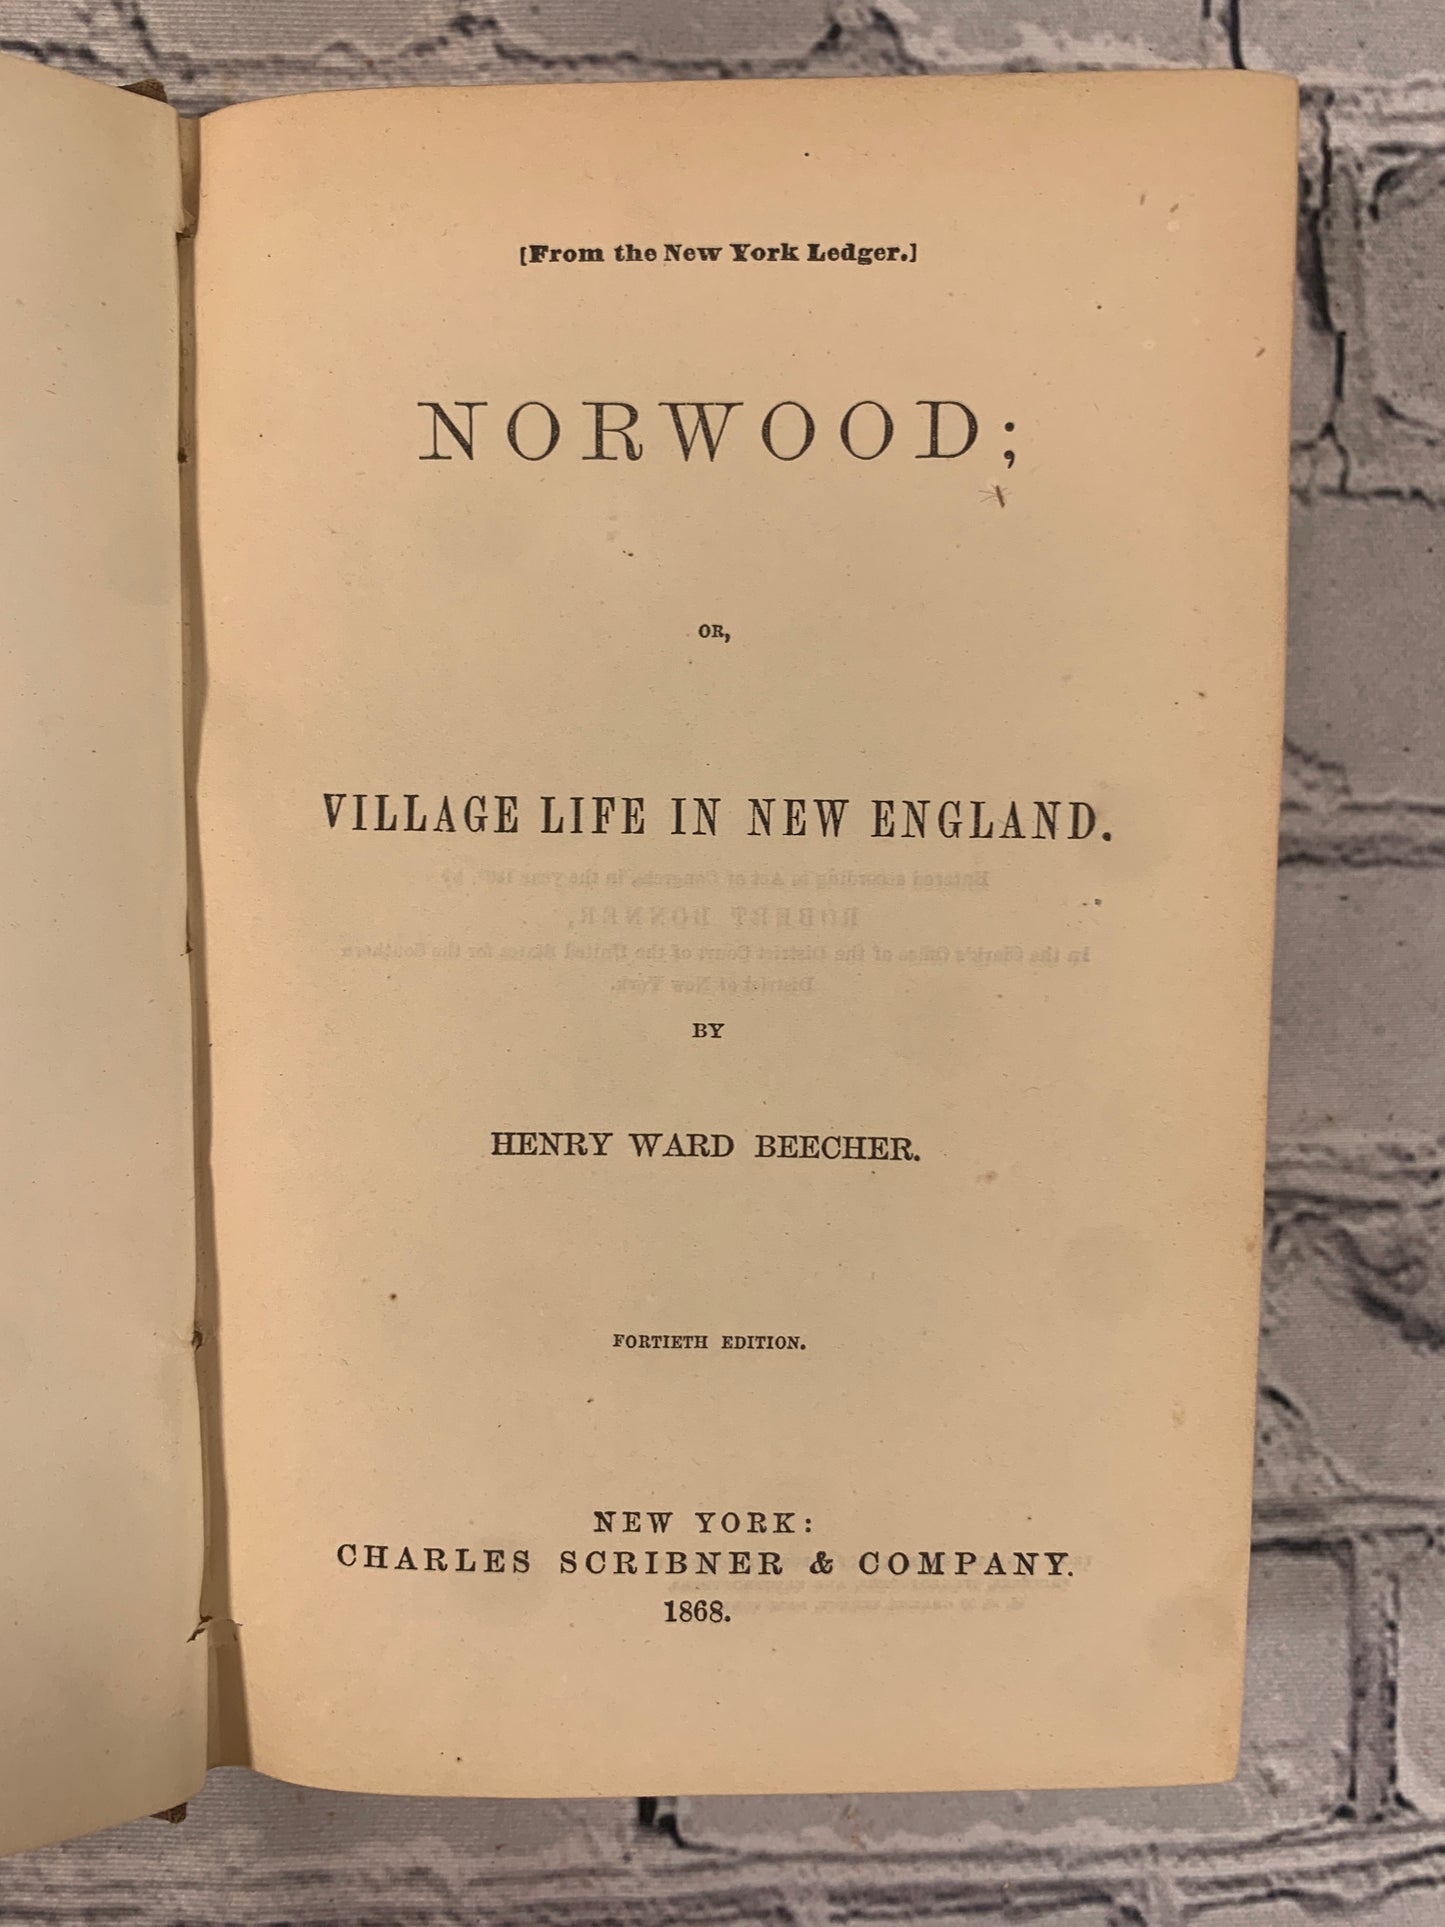 Norwood or Village Life in New England by Henry Ward Beecher [1868]